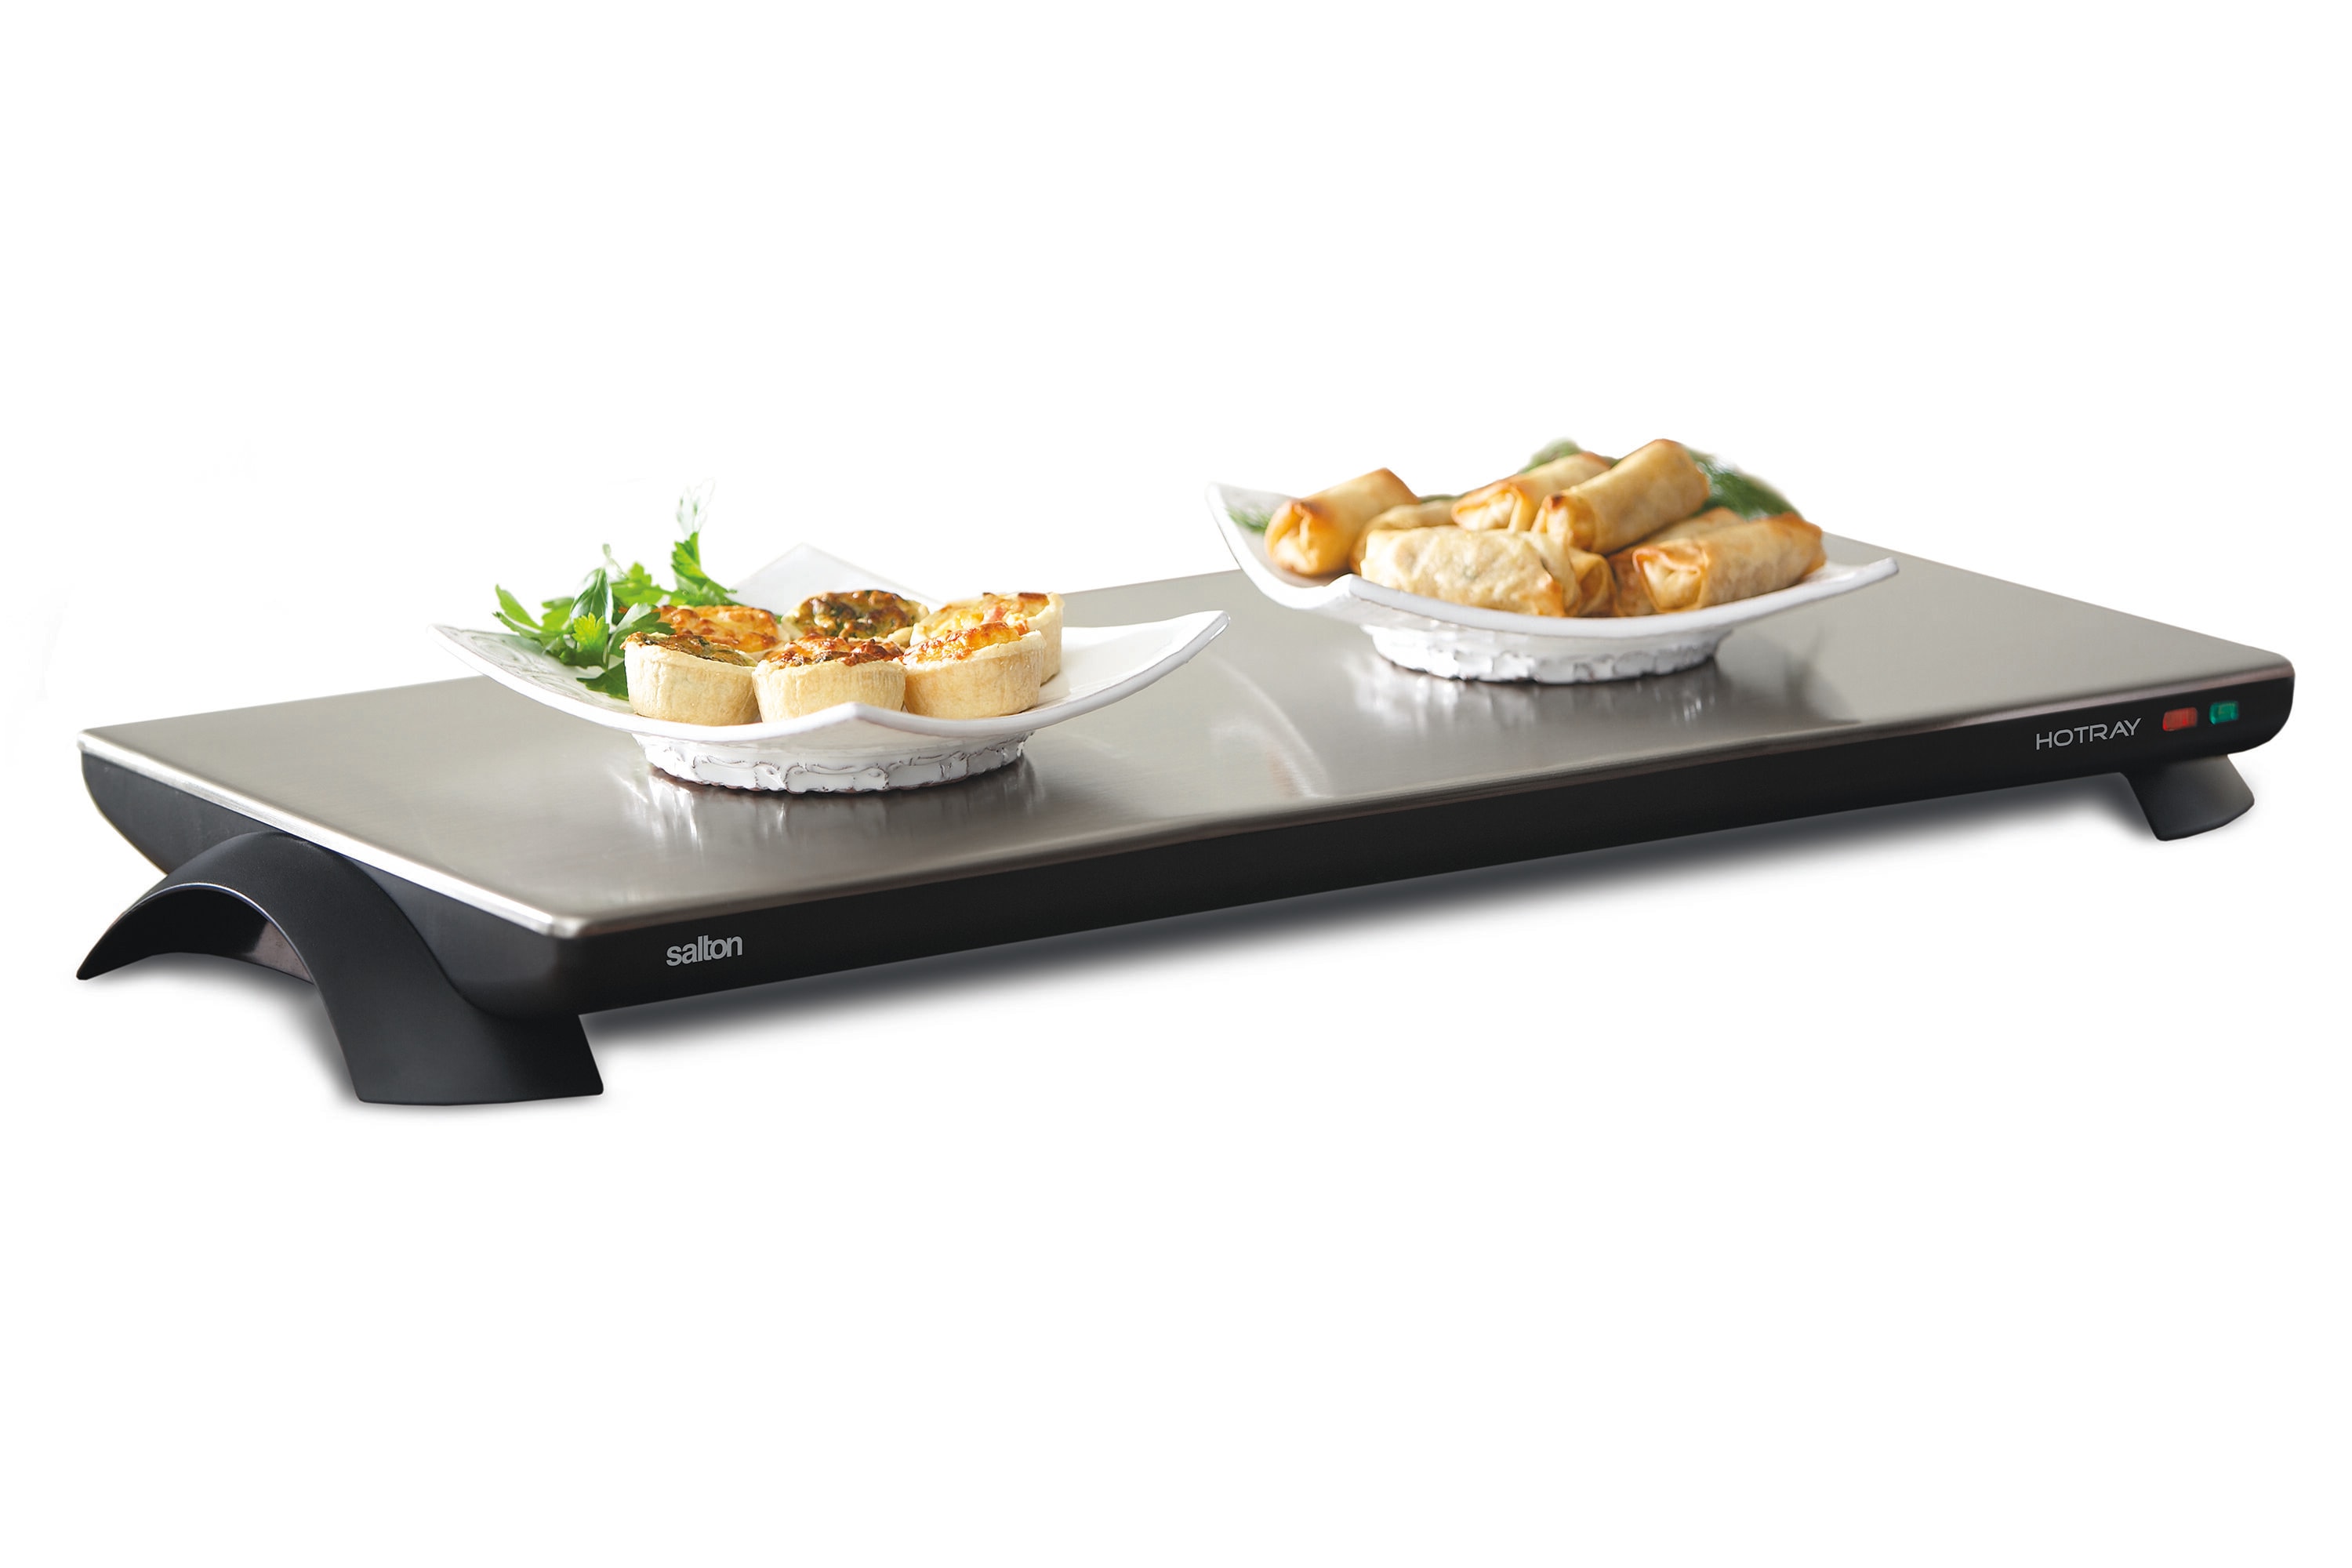 Round Warming Tray by Salton, Cordless Electric Hot Plate, Cooking,  Serving